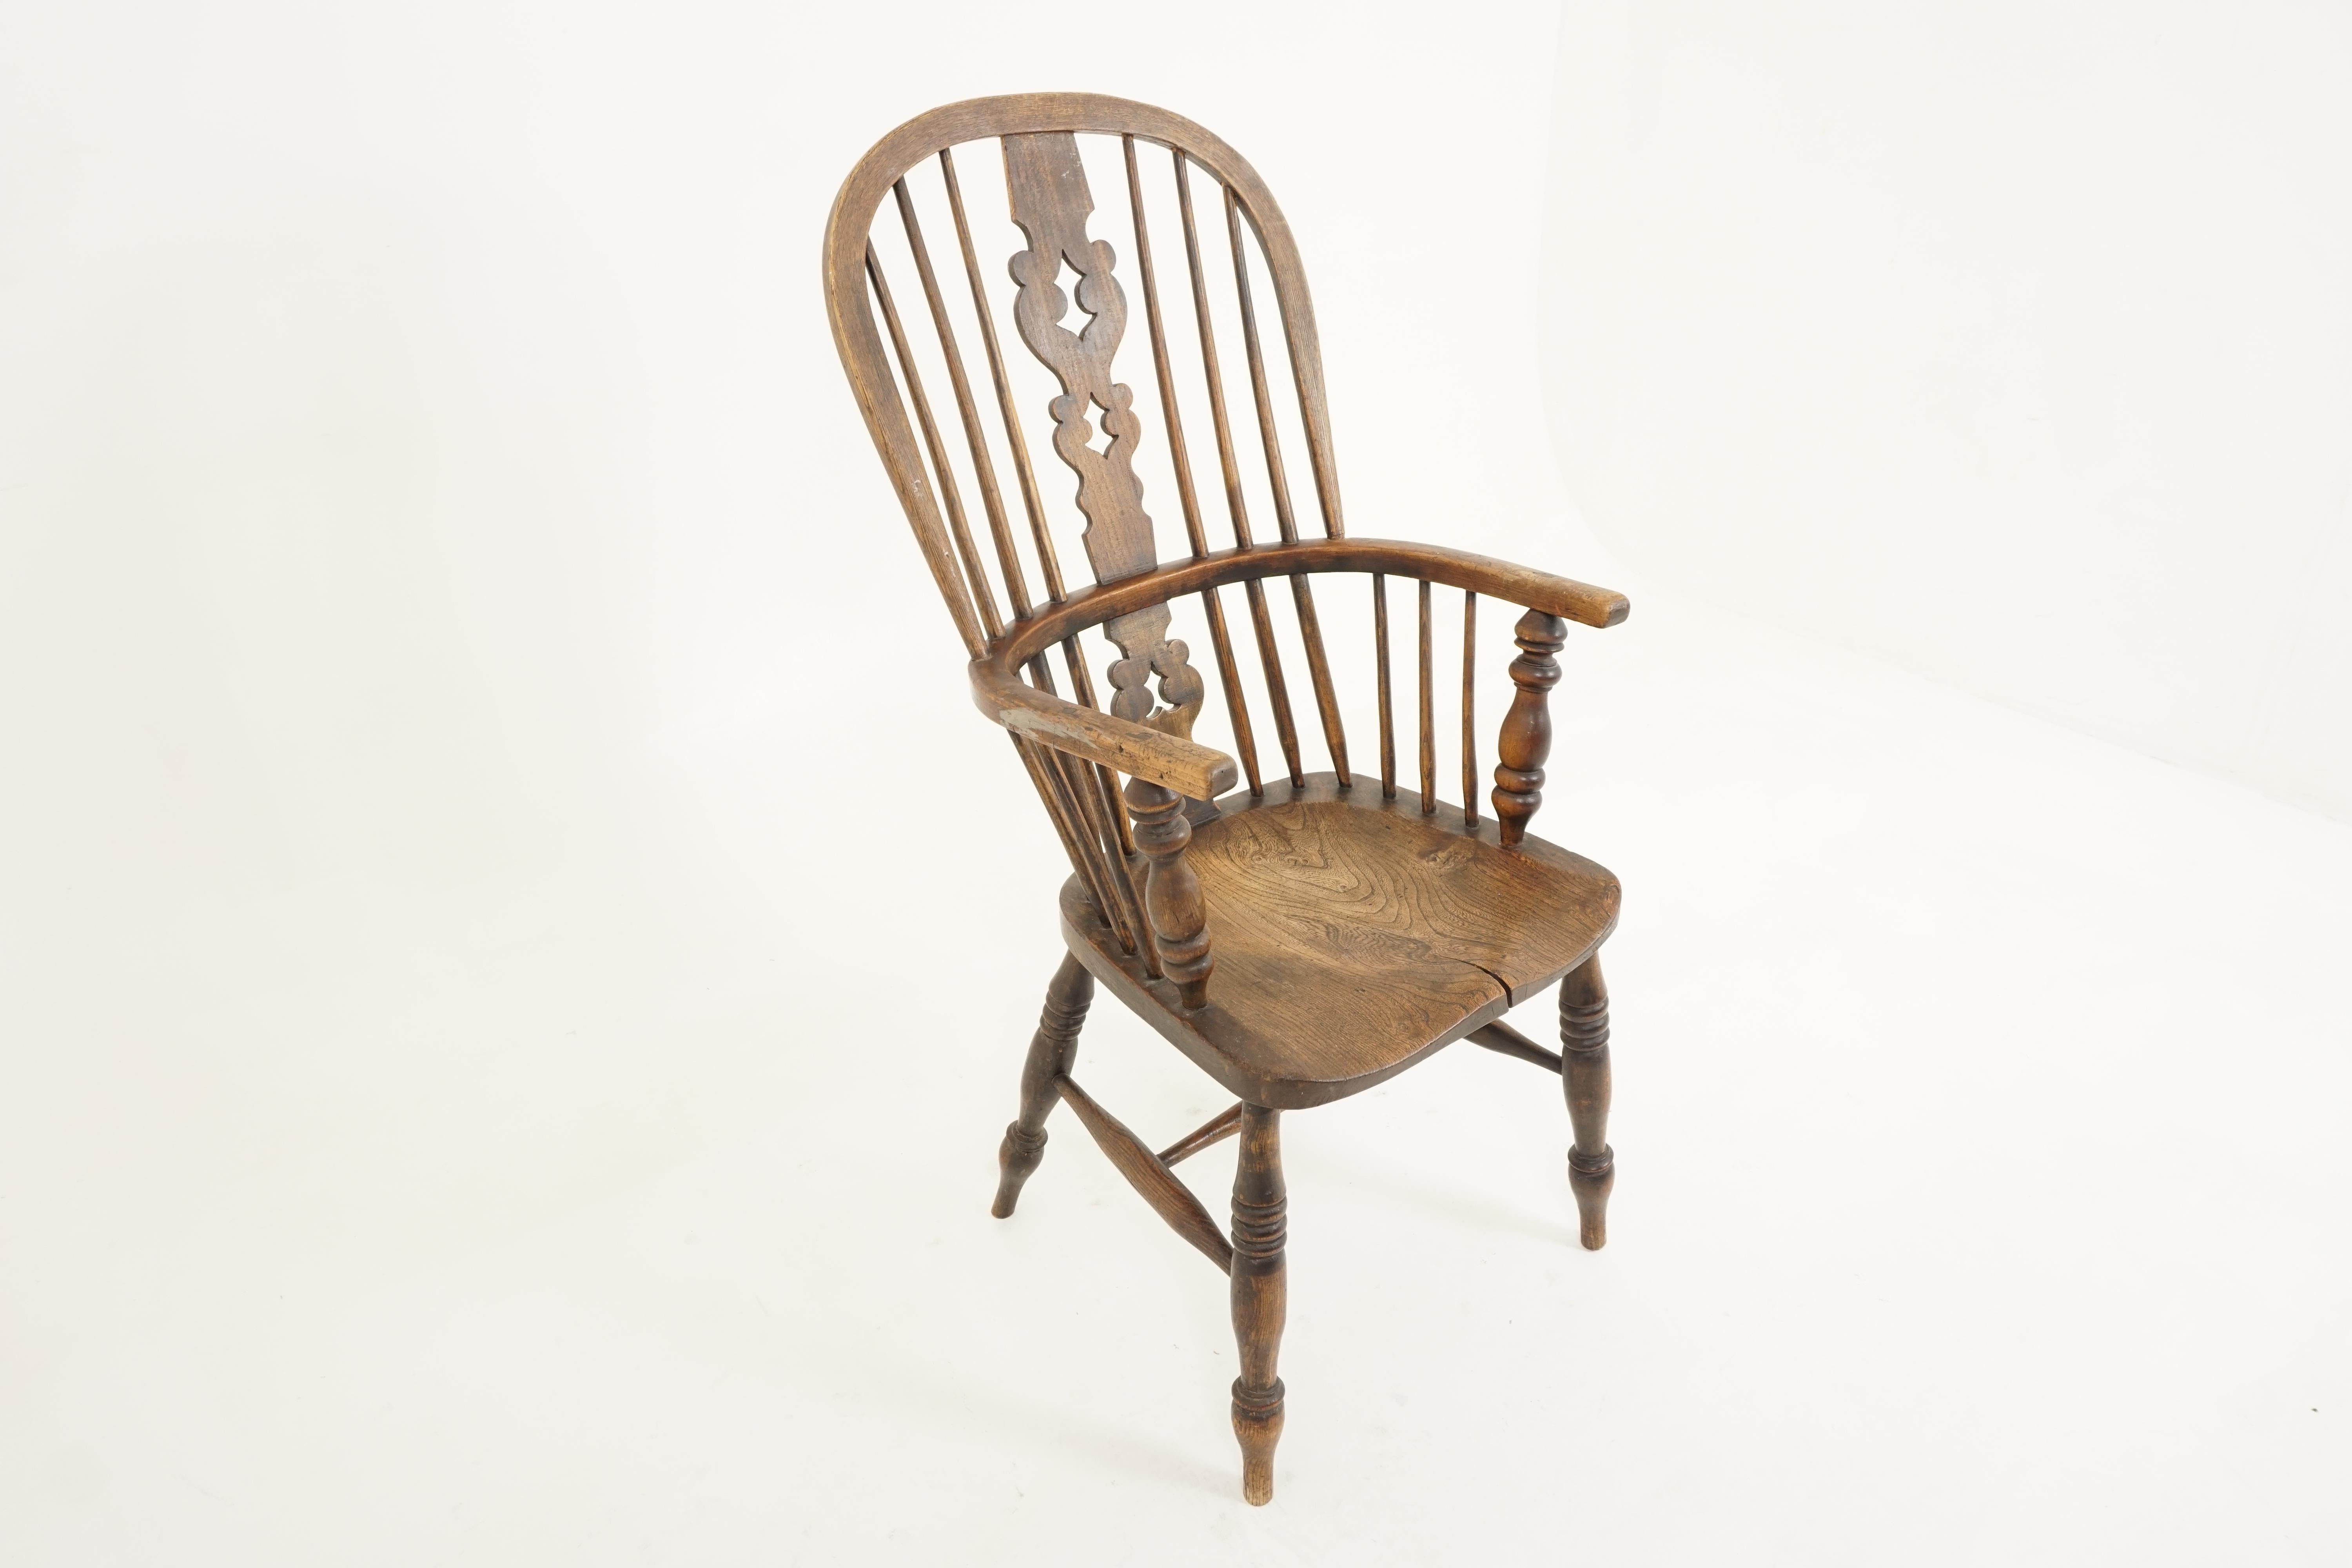 Hand-Crafted Antique Victorian Chair, Ash + Elm, Windsor Arm Chair, Scotland, 1840